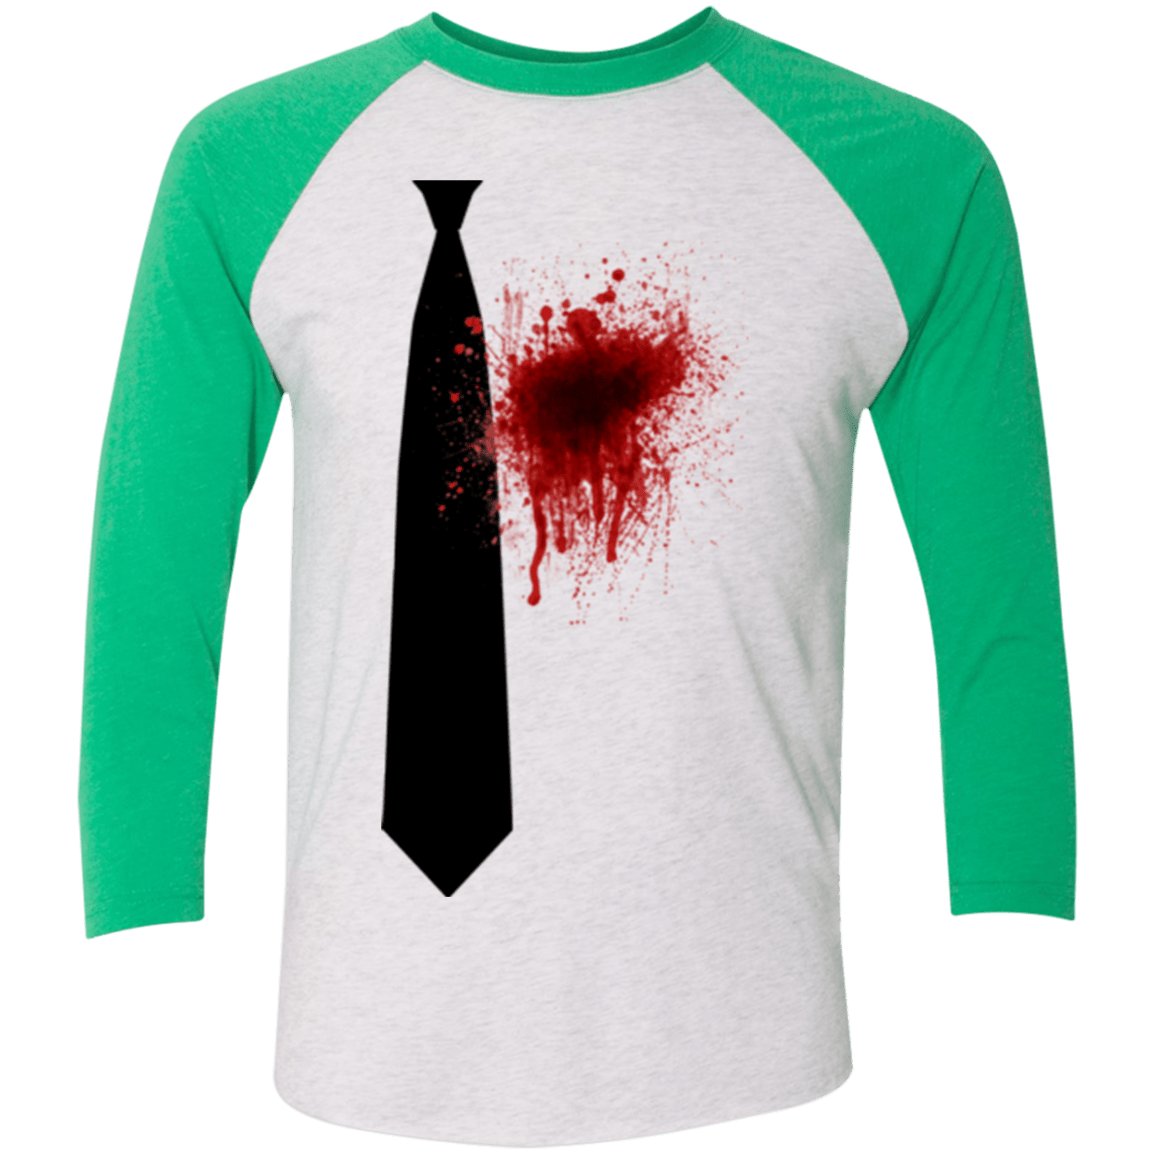 T-Shirts Heather White/Envy / X-Small Butcher tie Men's Triblend 3/4 Sleeve